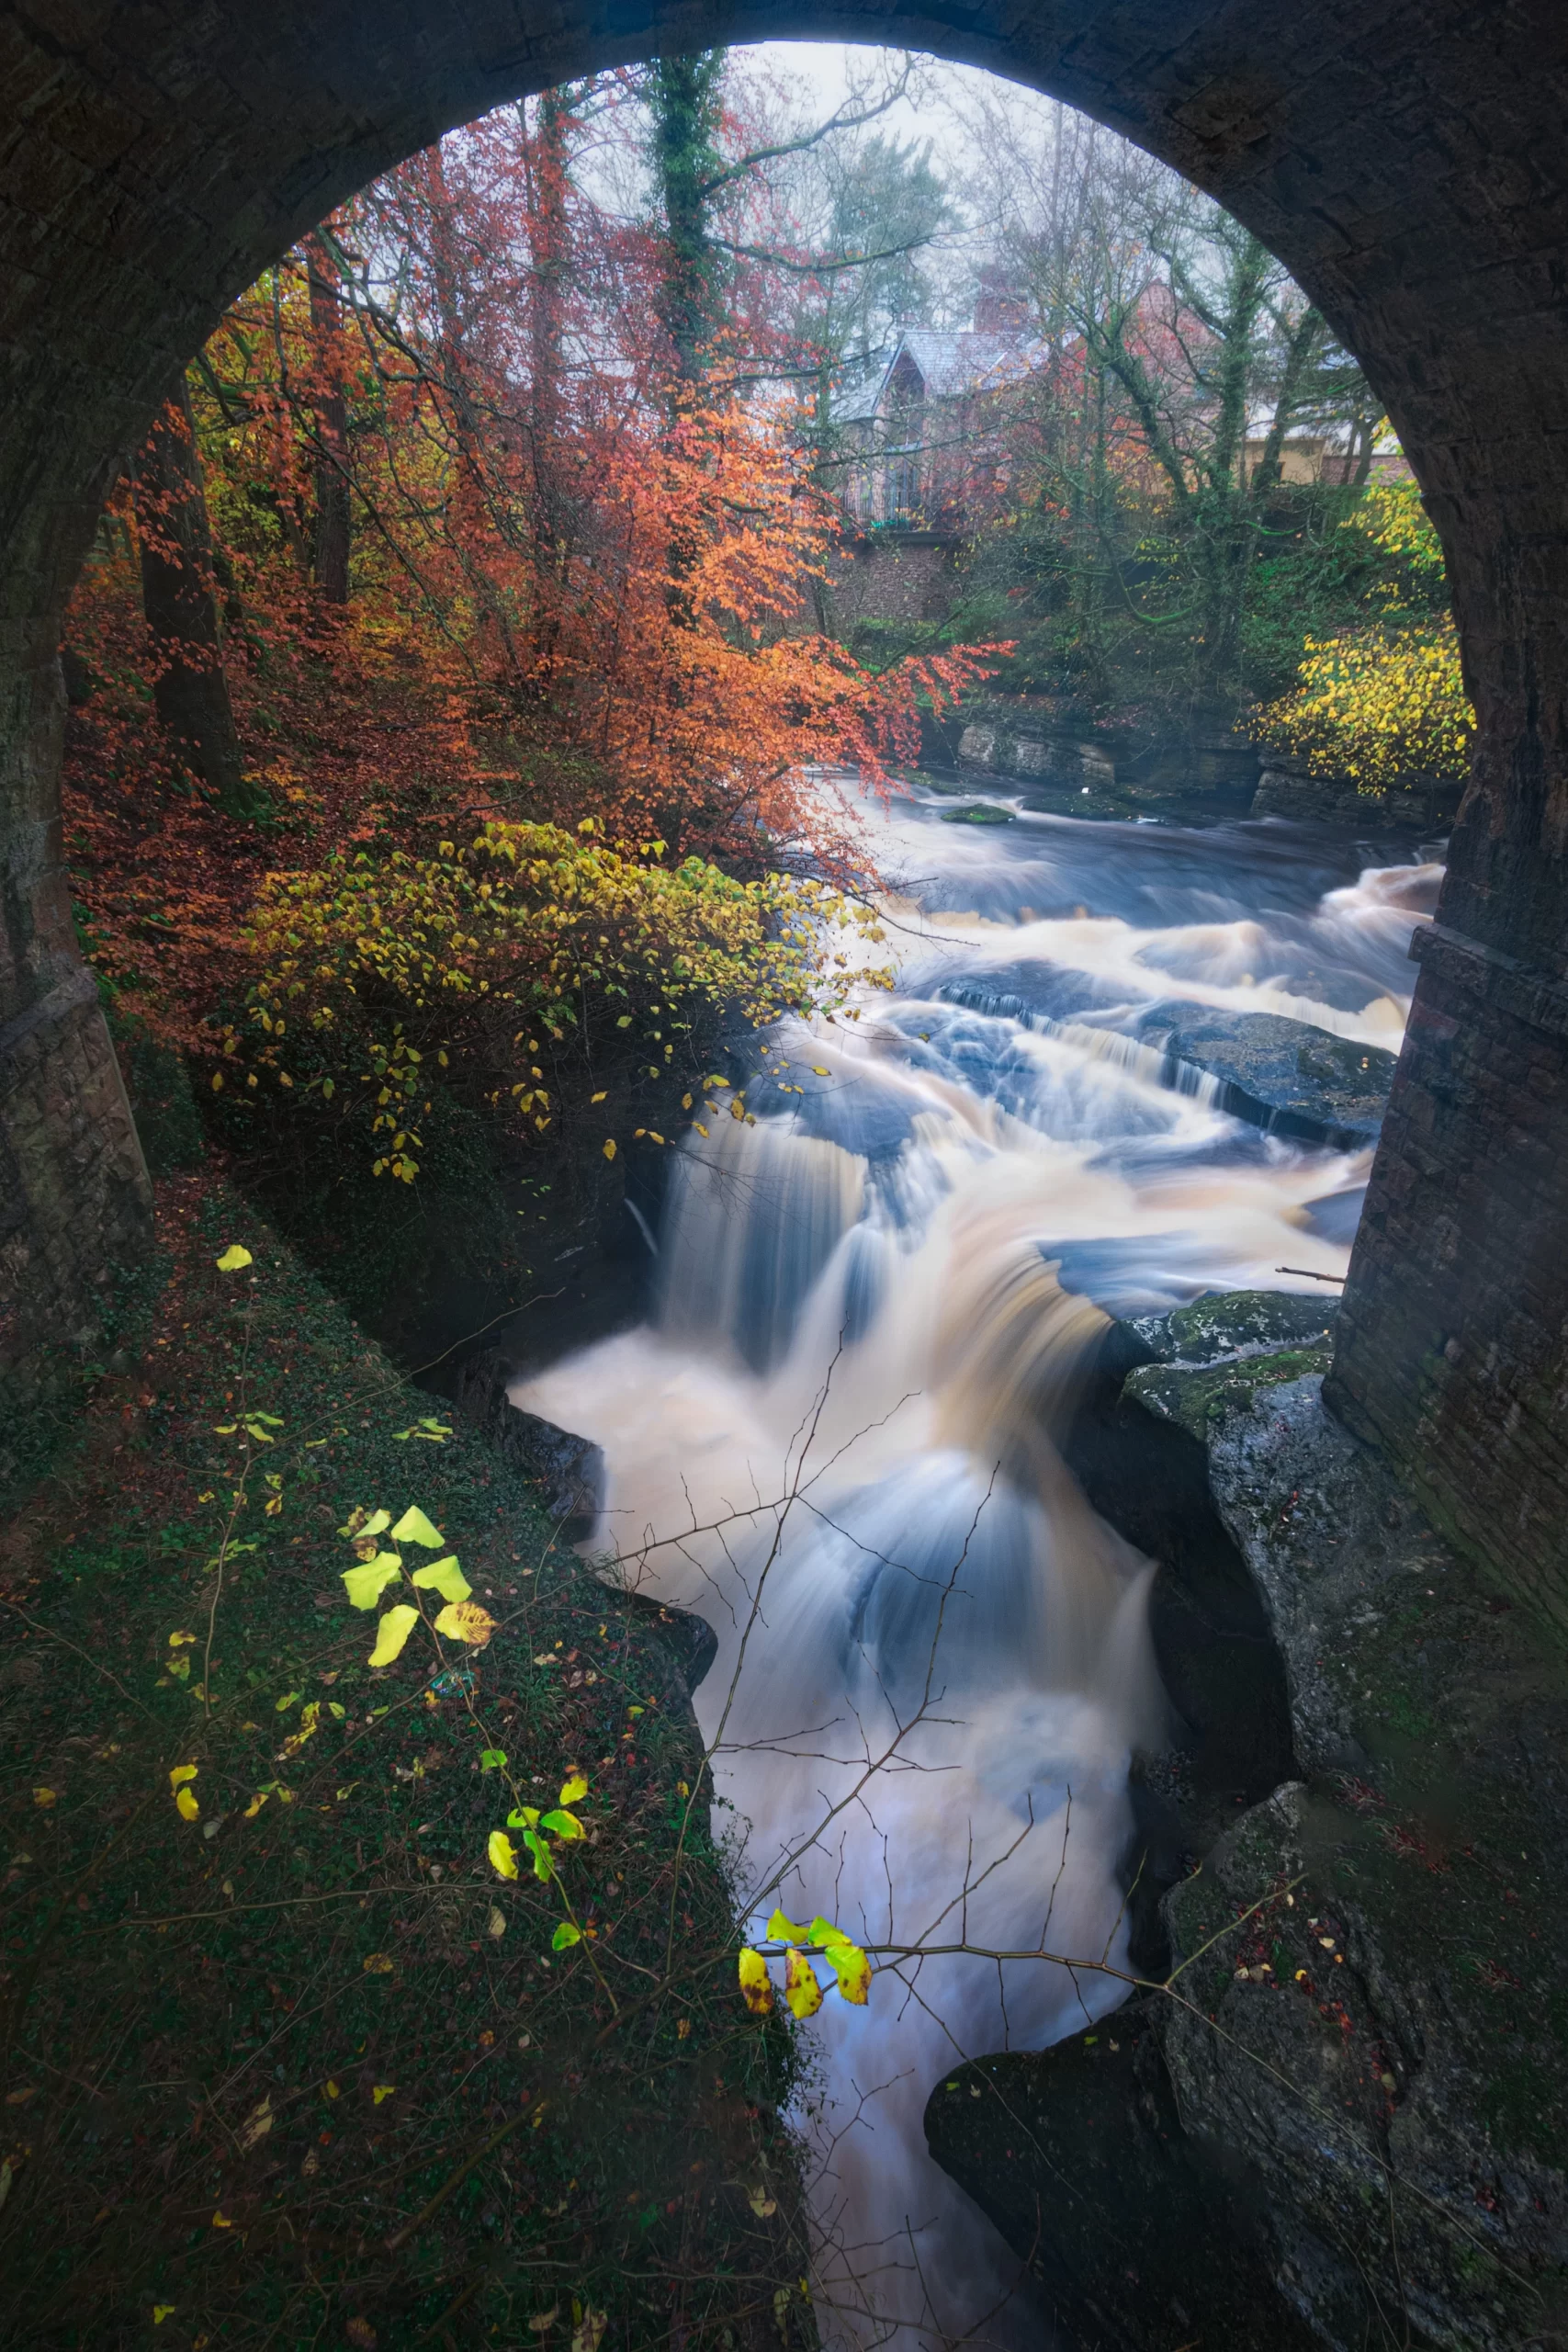 Stenkrith Park, Kirkby Stephen, UK Published on November 17, 2019 Fujifilm, X-T2 Free to use under the Unsplash License The River Eden starts its life up on Black Fell Moss in the Mallerstang valley. By the time it’s made its way out of Mallerstang into the Vale of Eden, it starts cutting through the brockram rock (a type of mix of limestone and sandstone). South of Kirkby Stephen, at Stenkrith Park, the Eden drops dramatically into a gorge called Coopkarnel, otherwise known as the Devil’s Grinding Mill. It’s a spectacular sight from the Millennium Bridge, and the roaring sound makes your tummy flip in awe of the forces involved.